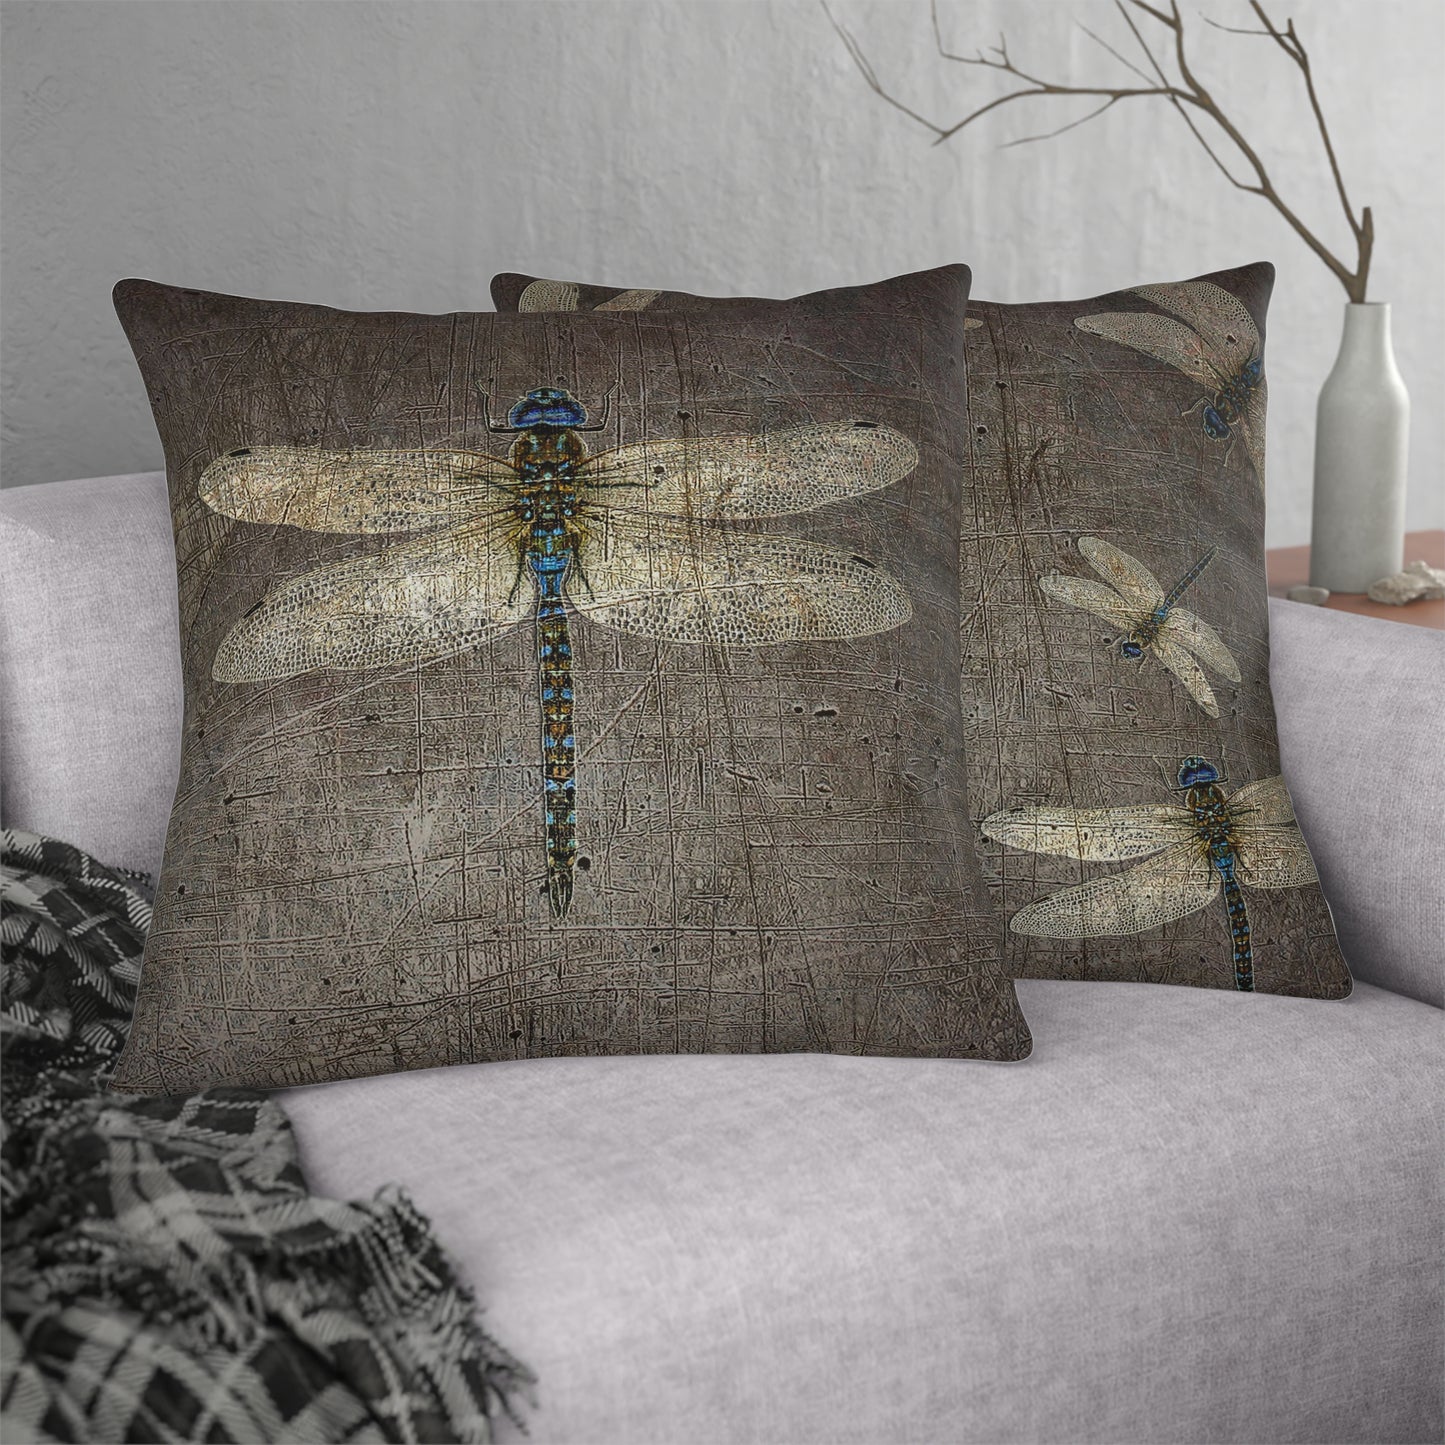 Large Double Sided Throw Pillow Dragonfly on Distressed Grey Stone Print - Dragonfly Themed Home Decor front and back on sofa